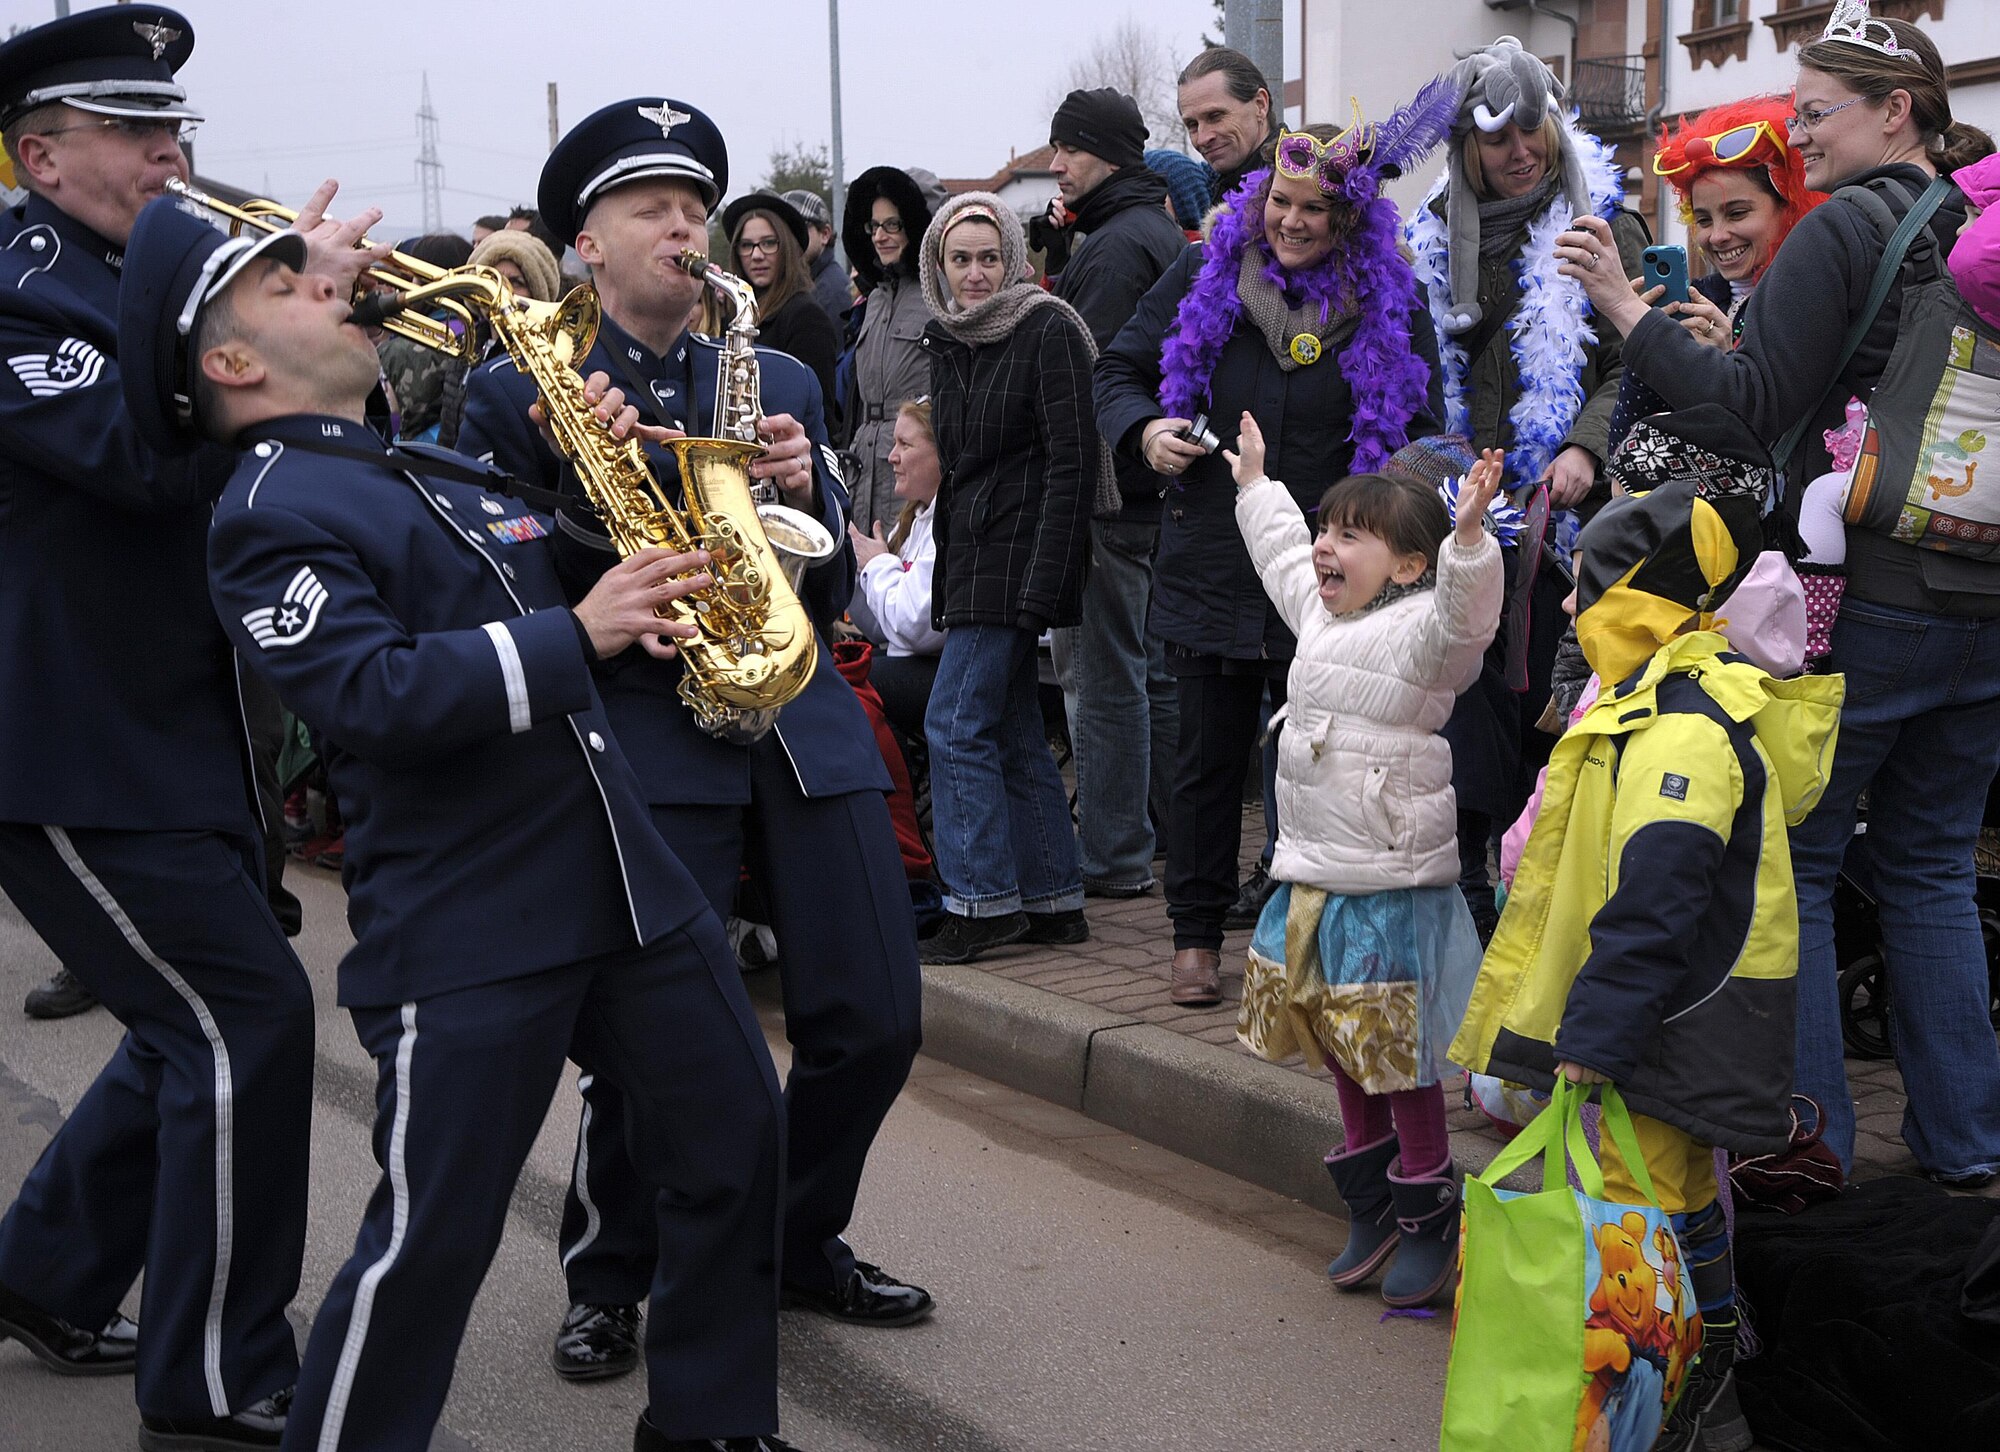 Members of the U.S. Air Forces in Europe Band interact with the crowd during the Fasching parade Feb. 17, 2015, in Ramstein-Miesenbach, Germany. The USAFE Band and approximately 1,400 other participants marched in the parade for more than two hours, entertaining the crowd. (U.S. Air Force photo/Senior Airman Timothy Moore)     